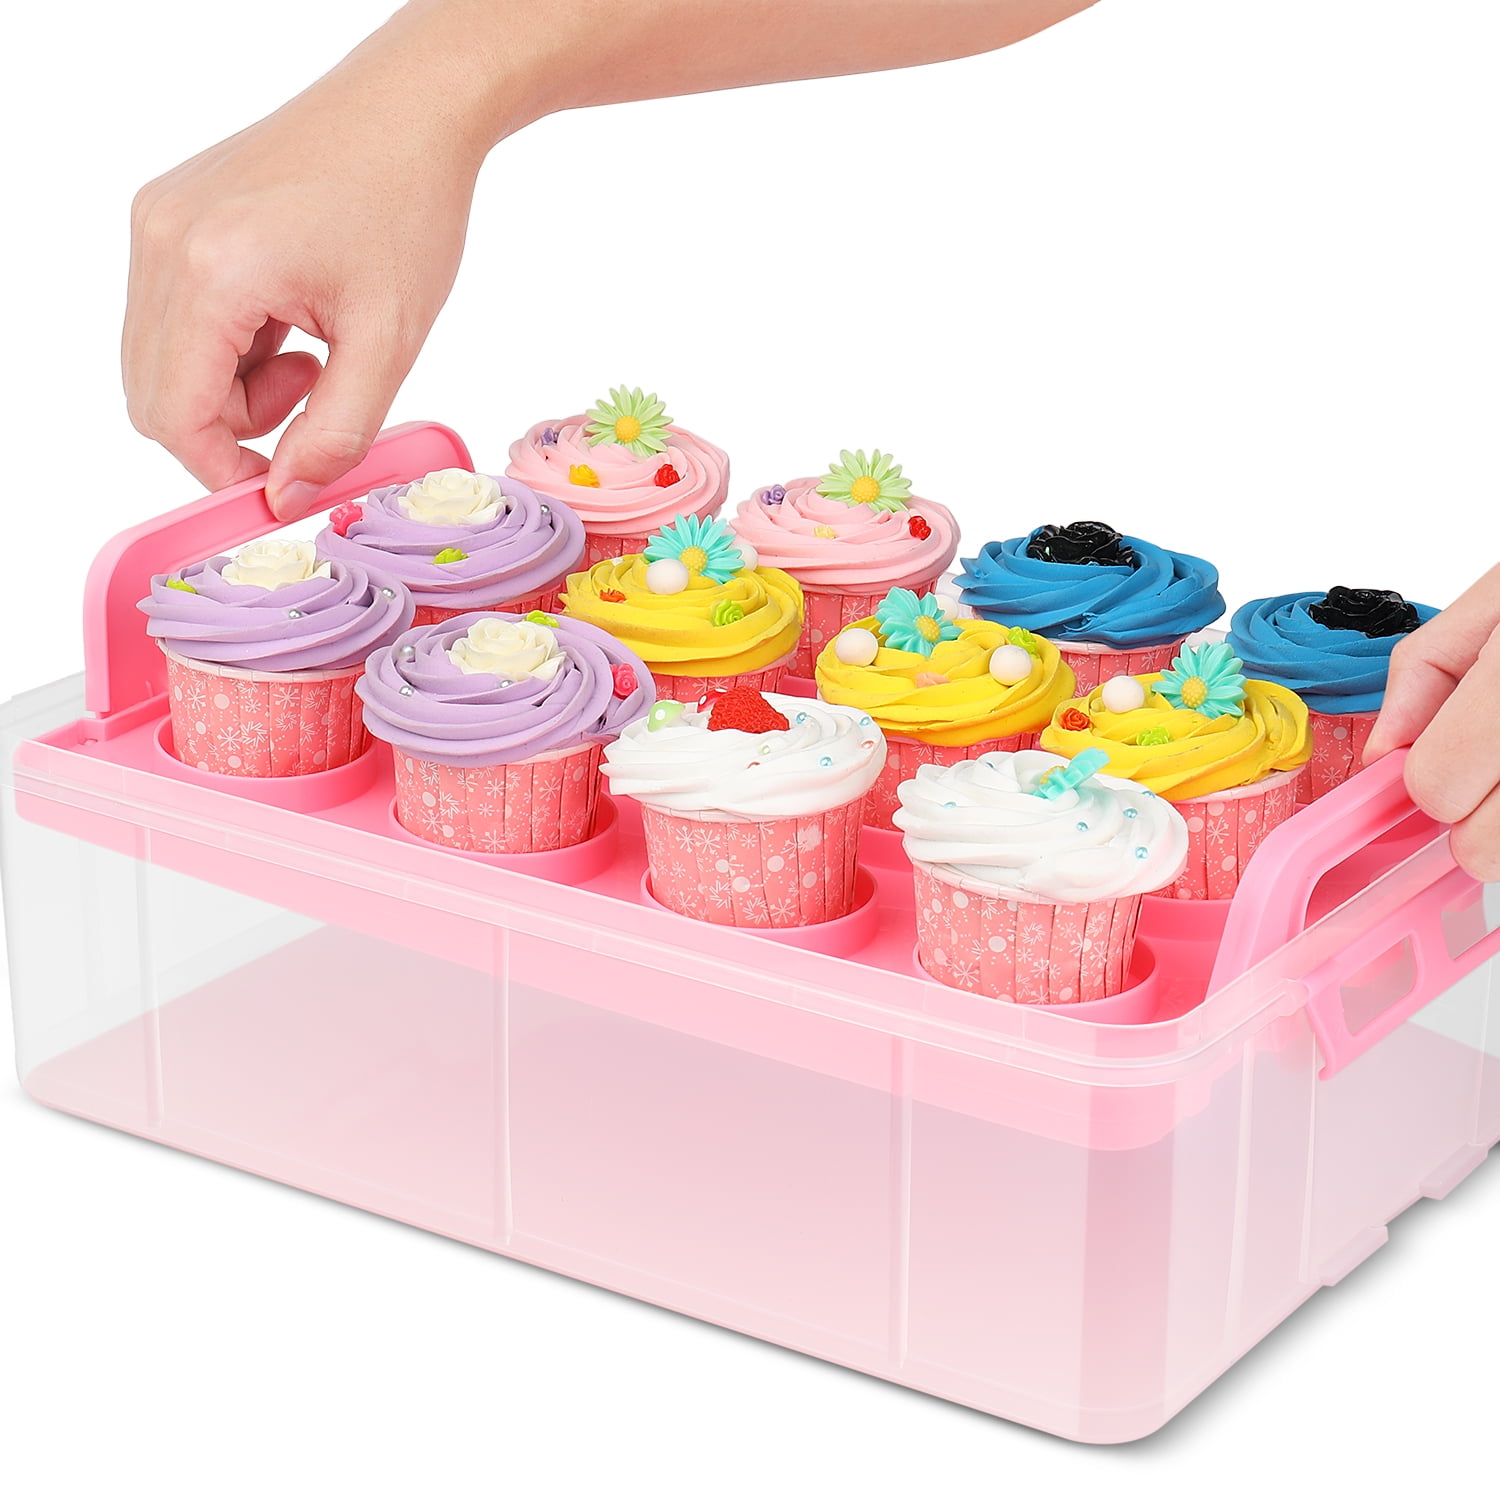 Knoxville 3-tiers Cupcake Carrier (White), Transport Container, BPA-Free,  Holds up to 36 Cupcakes